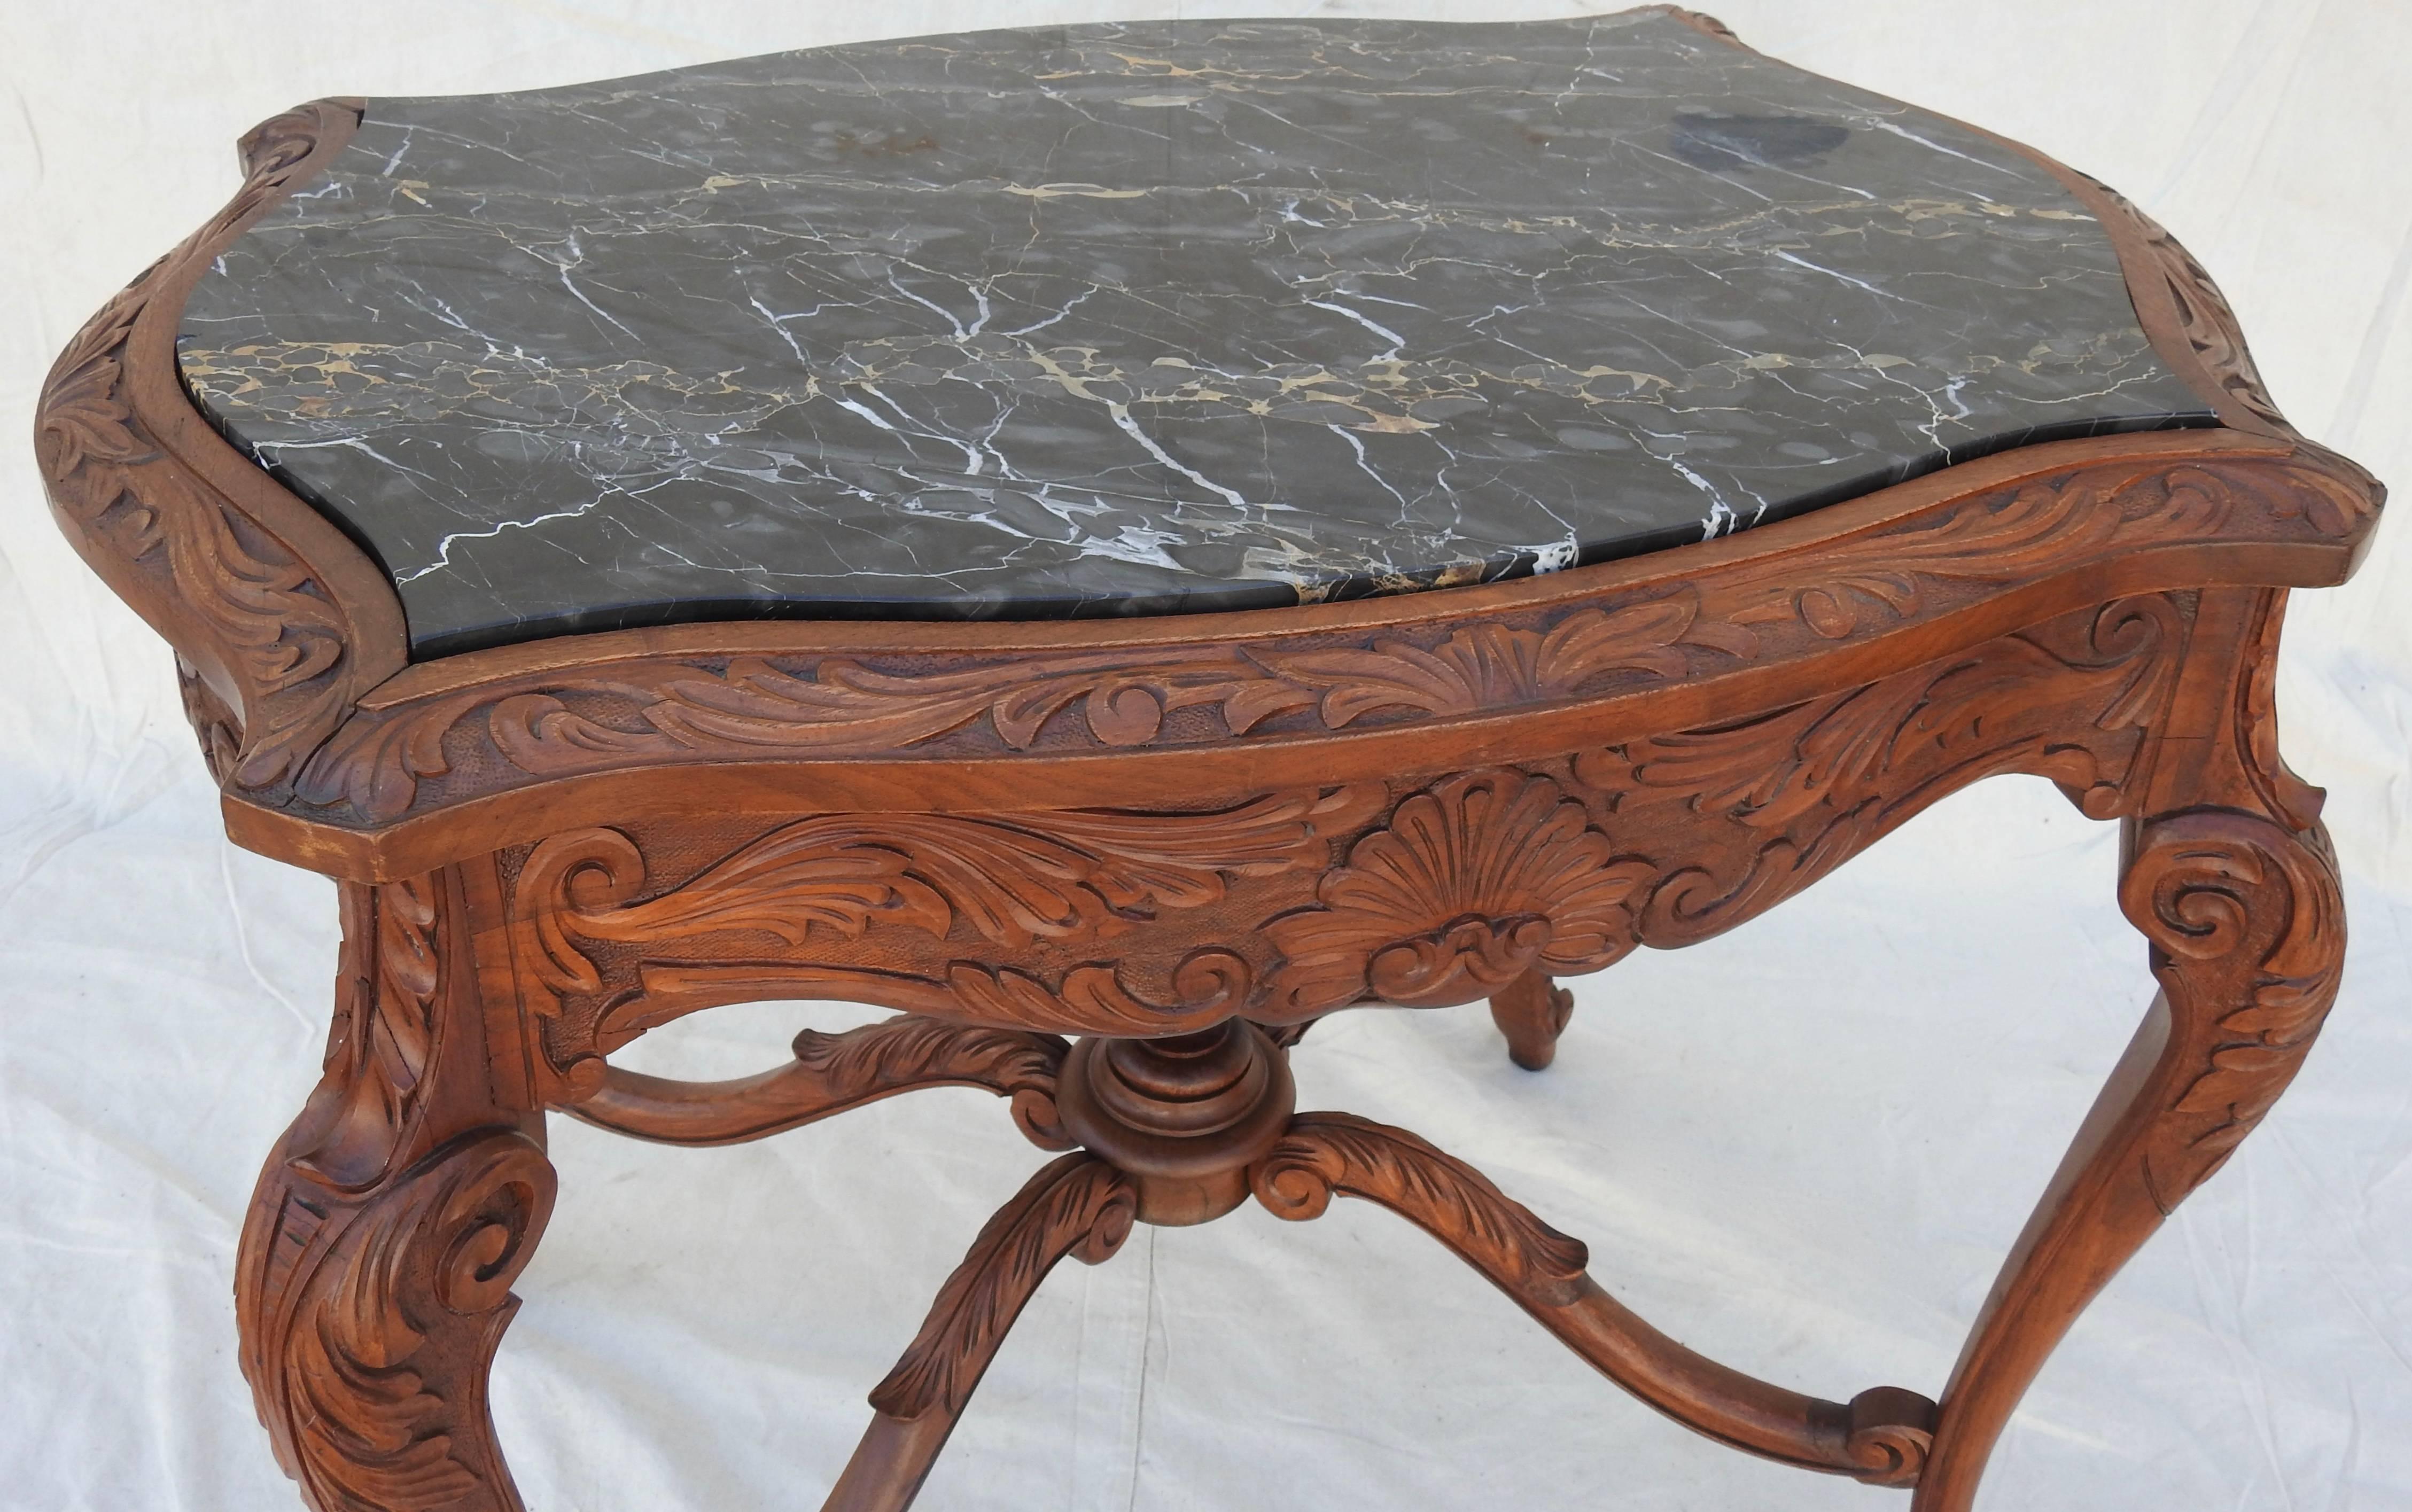 Offering this beautiful French Rococo marble-top walnut parlor table. Stunning hand carved detail of scrollwork, foliate and floral designs grace the skirt of this table. It is topped with black marble with veins of silver gray and brown. The marble